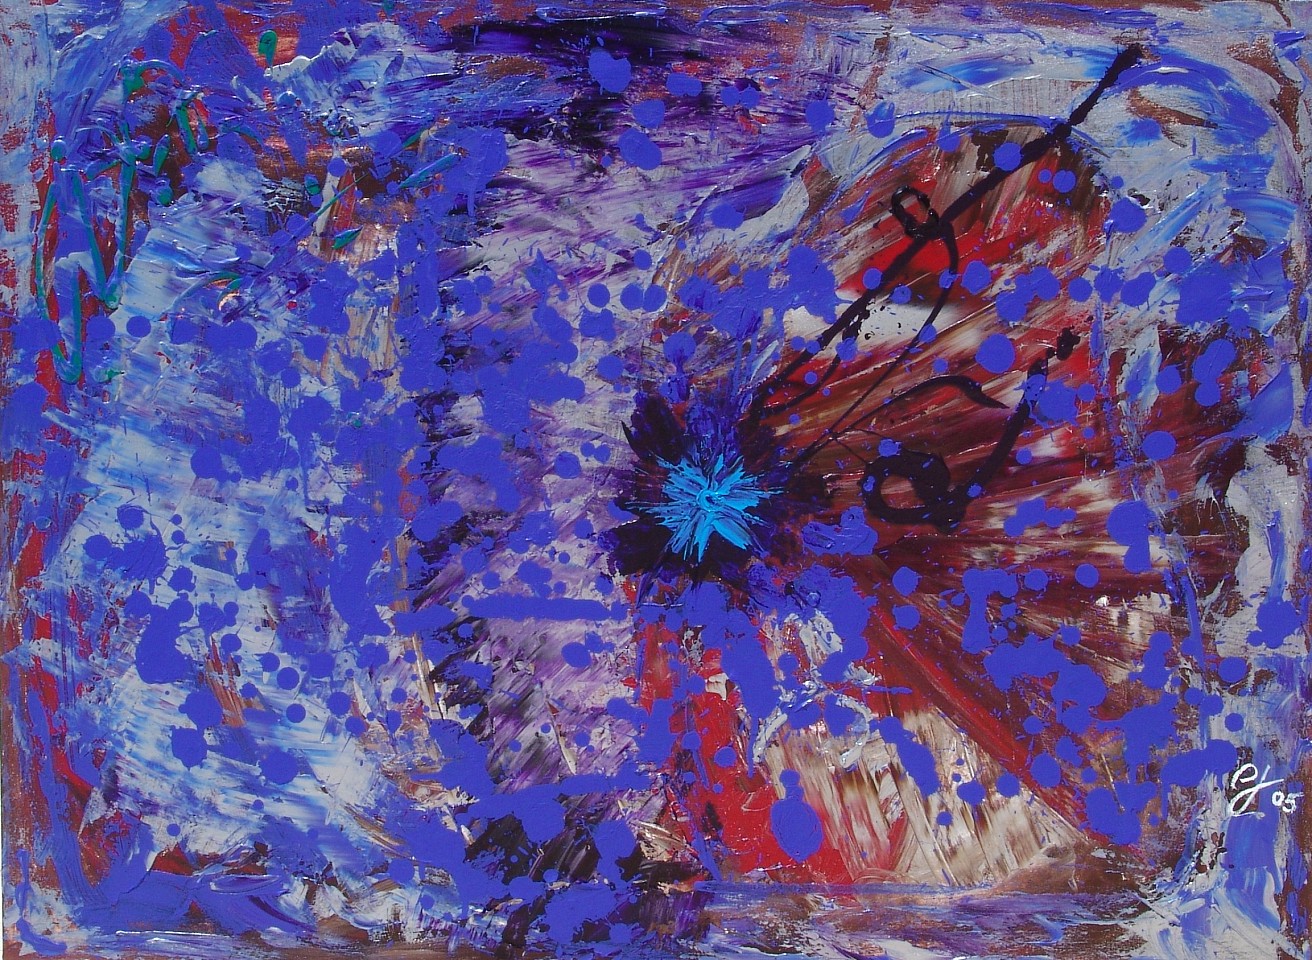 Diego Jacobson, Chaos and creation, 2005
Acrylic on Canvas, 48 x 36 in. (121.9 x 91.4 cm)
0511